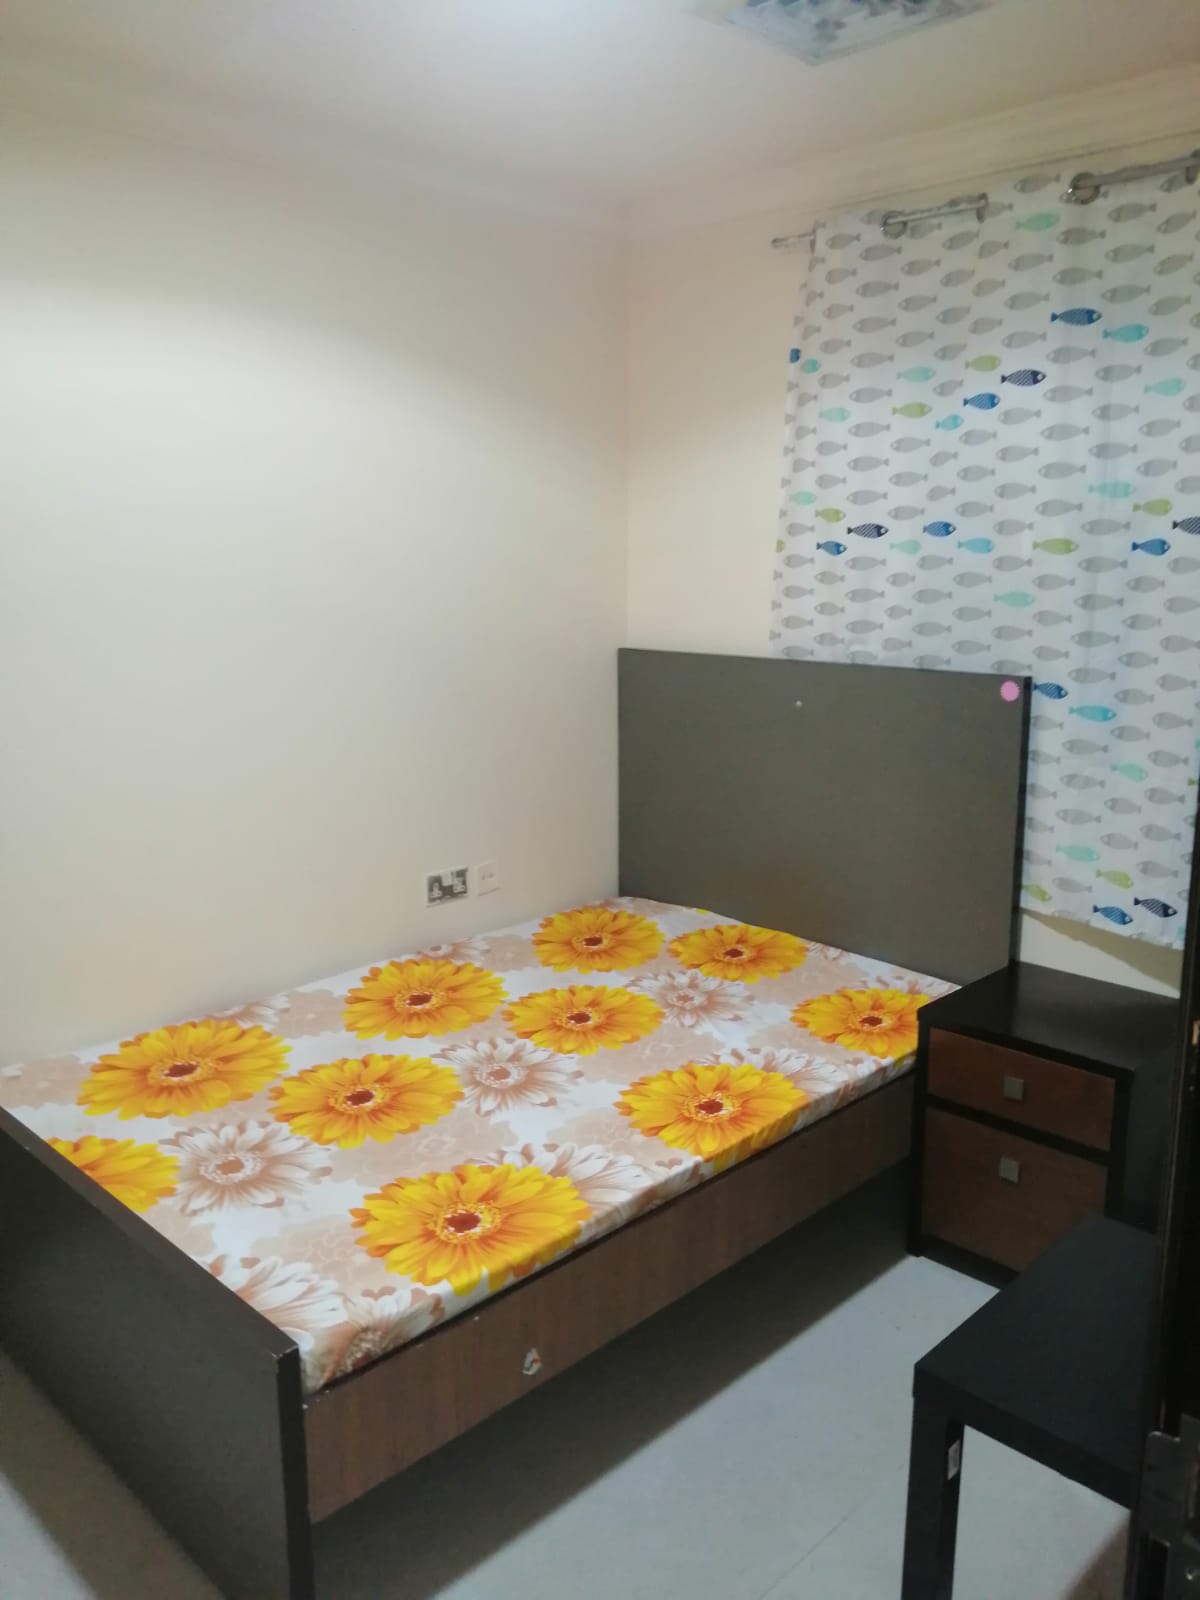 Fully Furnished Rooms in Bur Dubai For Couples With Attach Washroom @2200 Inclusive All, C/Ac, Gas, Dewa, Wifi